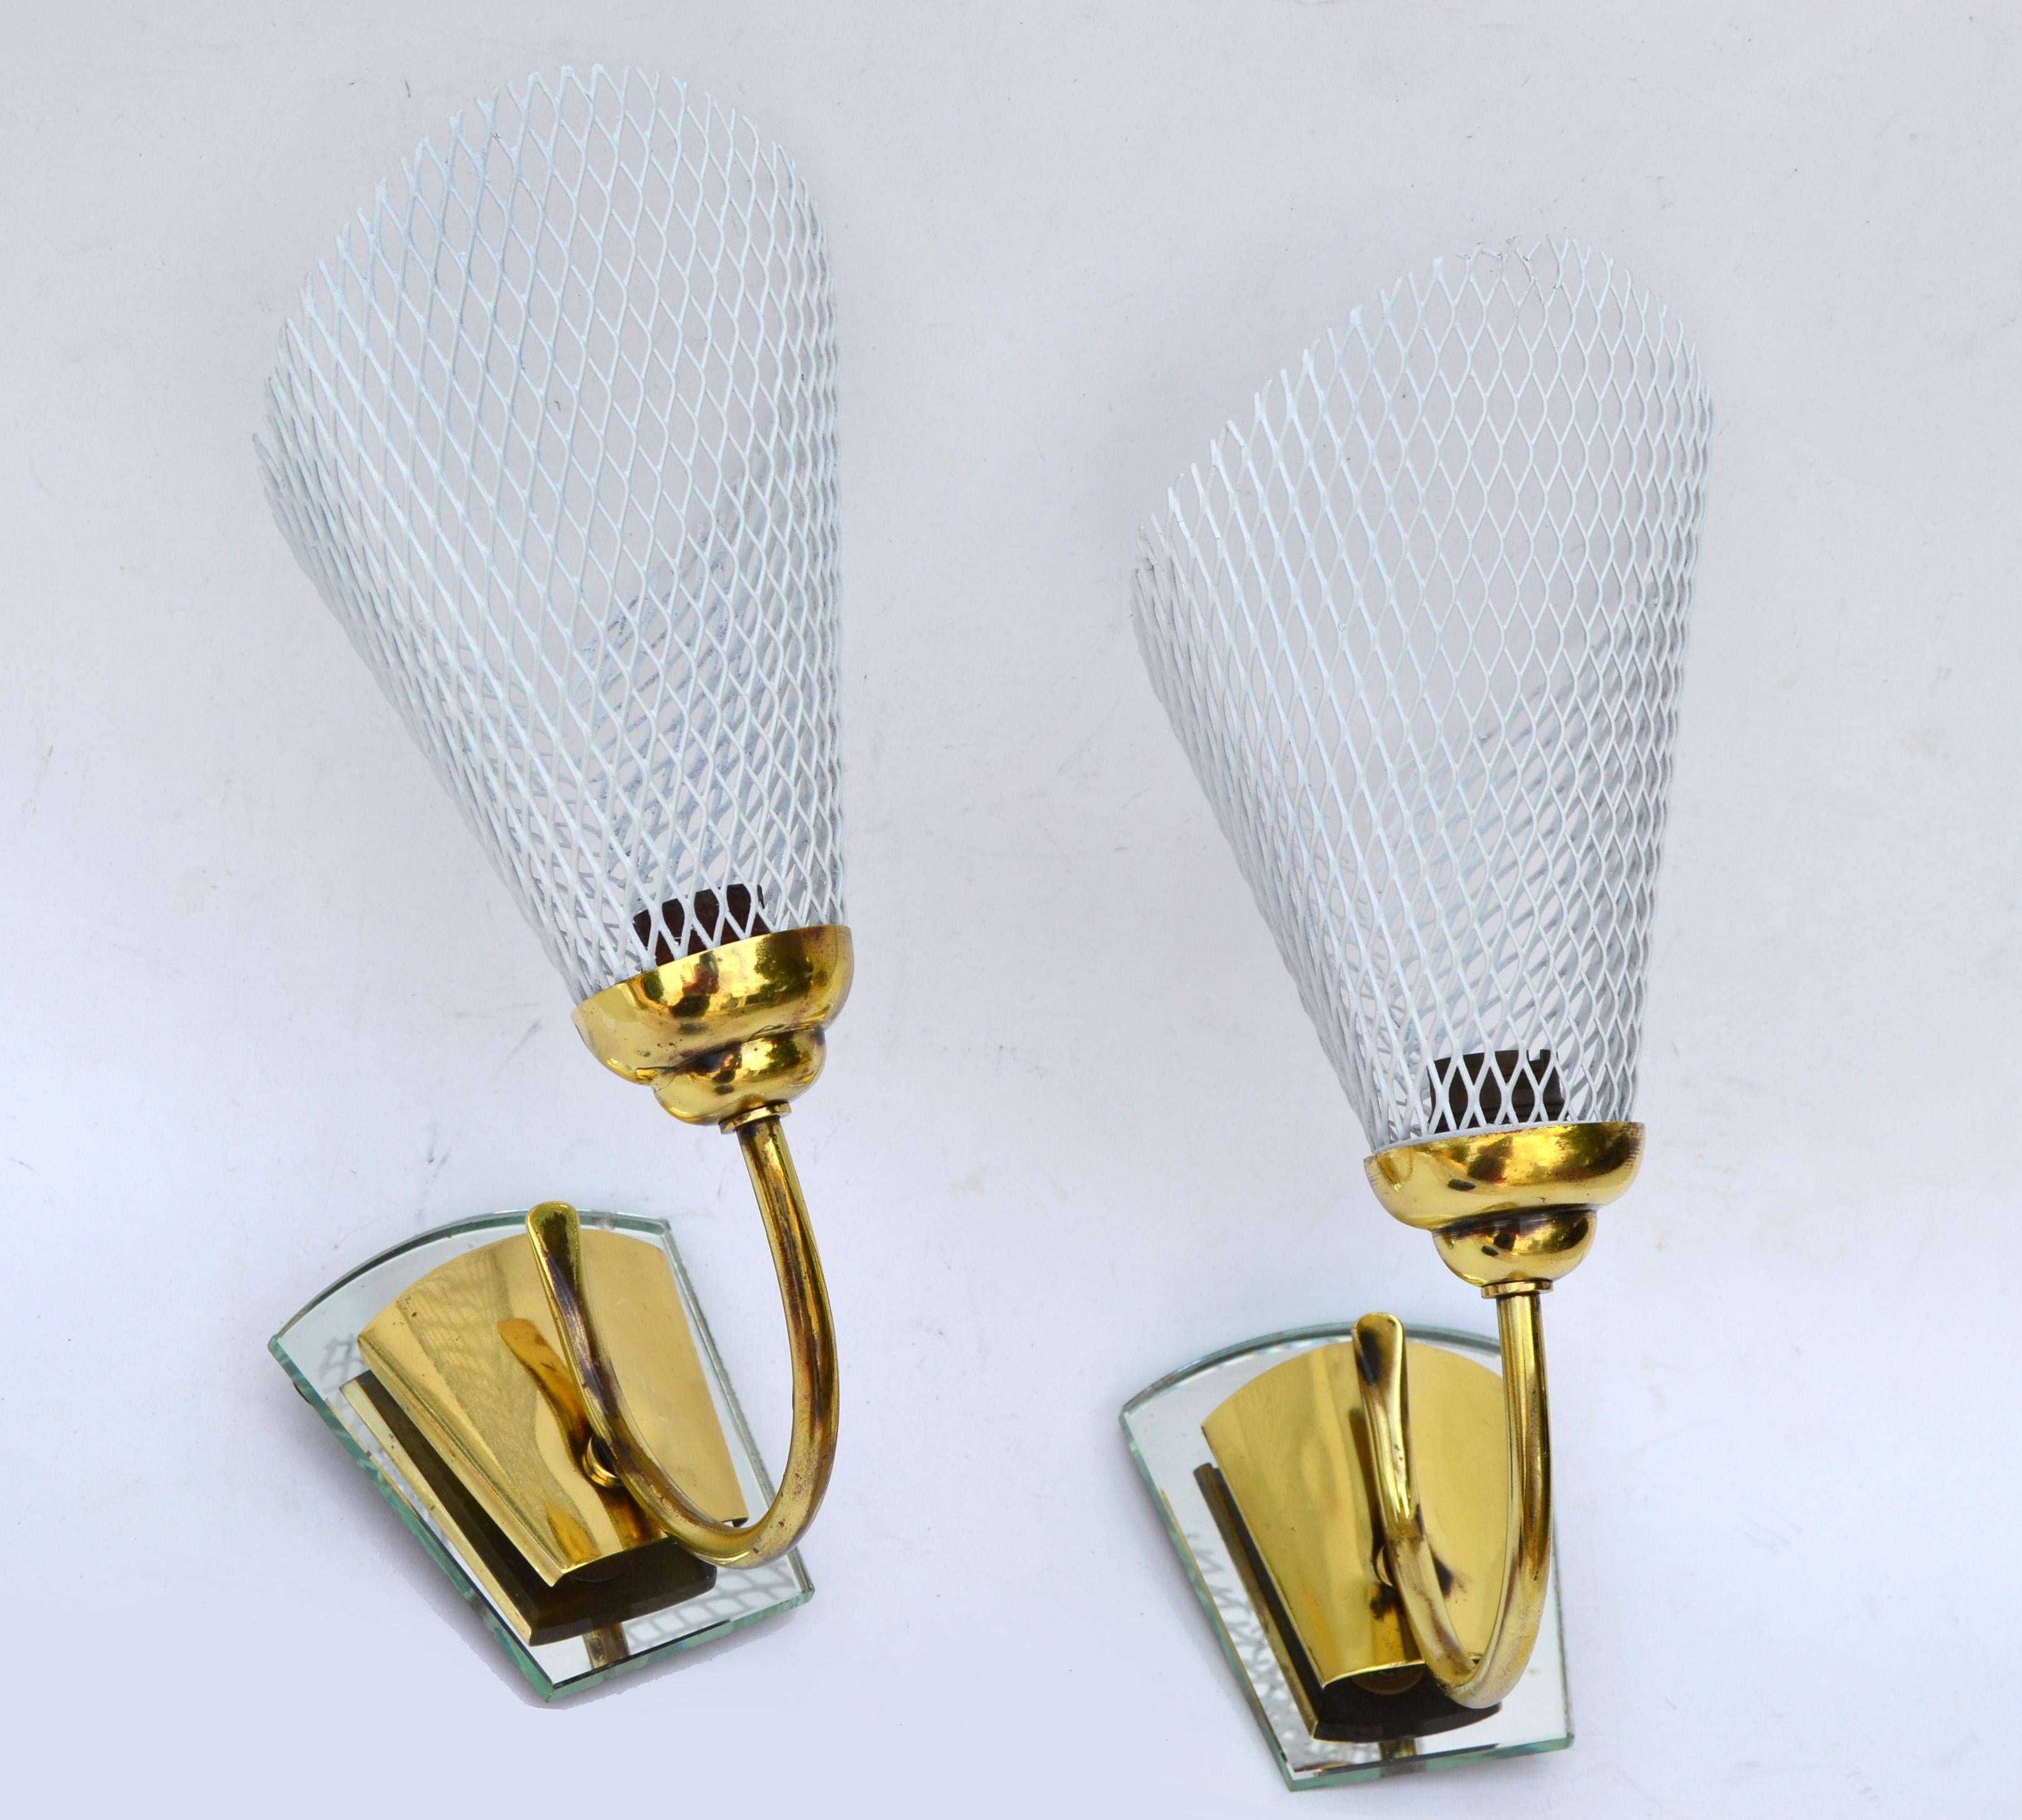 Hand-Painted Mathieu Matégot Sconces Brass, Mirror & White Metal Mesh Shades Wall Lamps, Pair For Sale